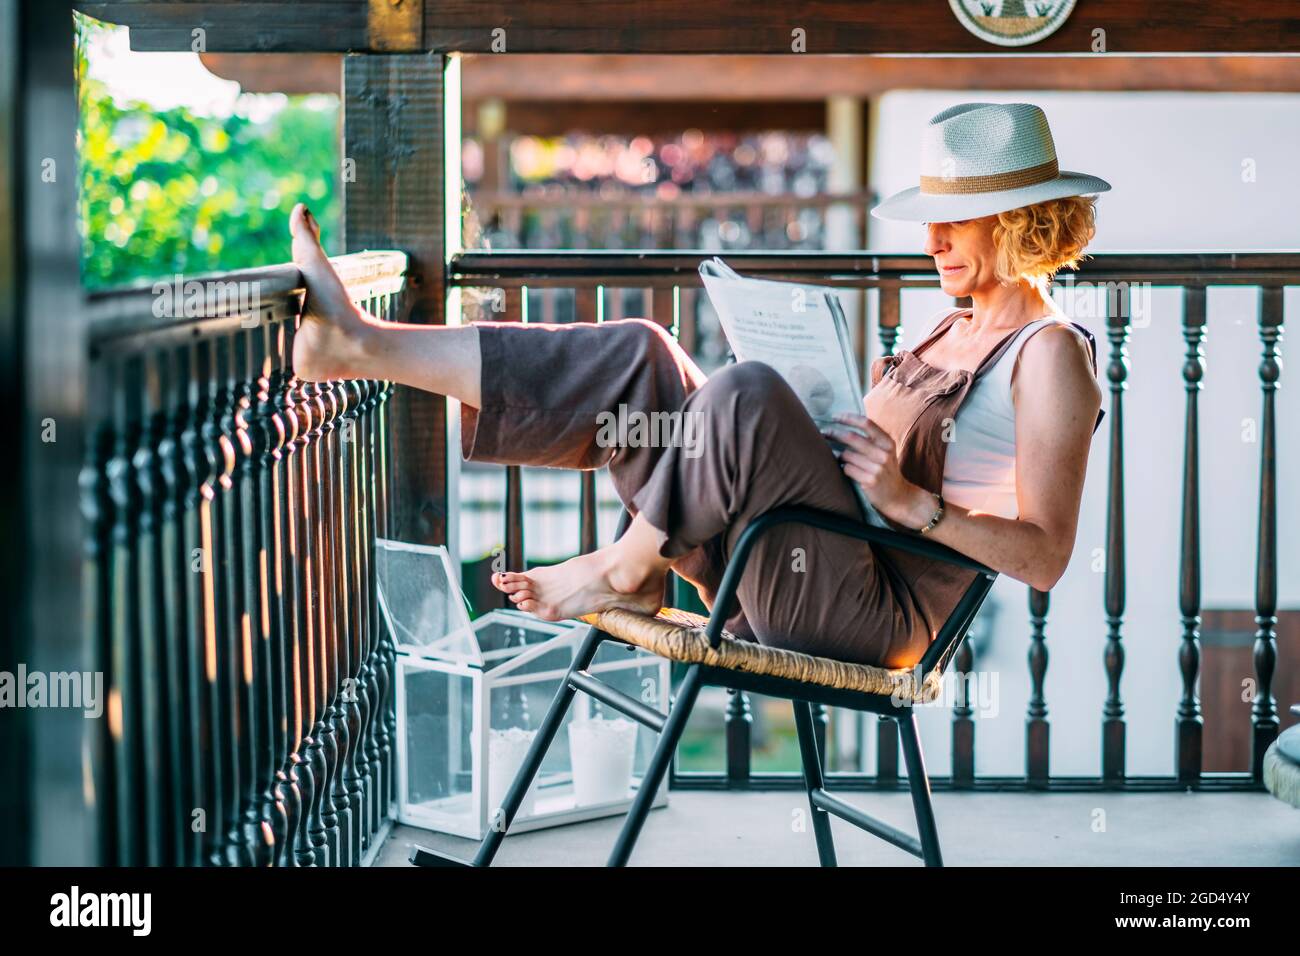 Mature caucasian blonde woman in her 50s with a hat and reading a newspaper sitting in a rocking chair in a relaxed pose on a porch. Lifestyle concept. Stock Photo